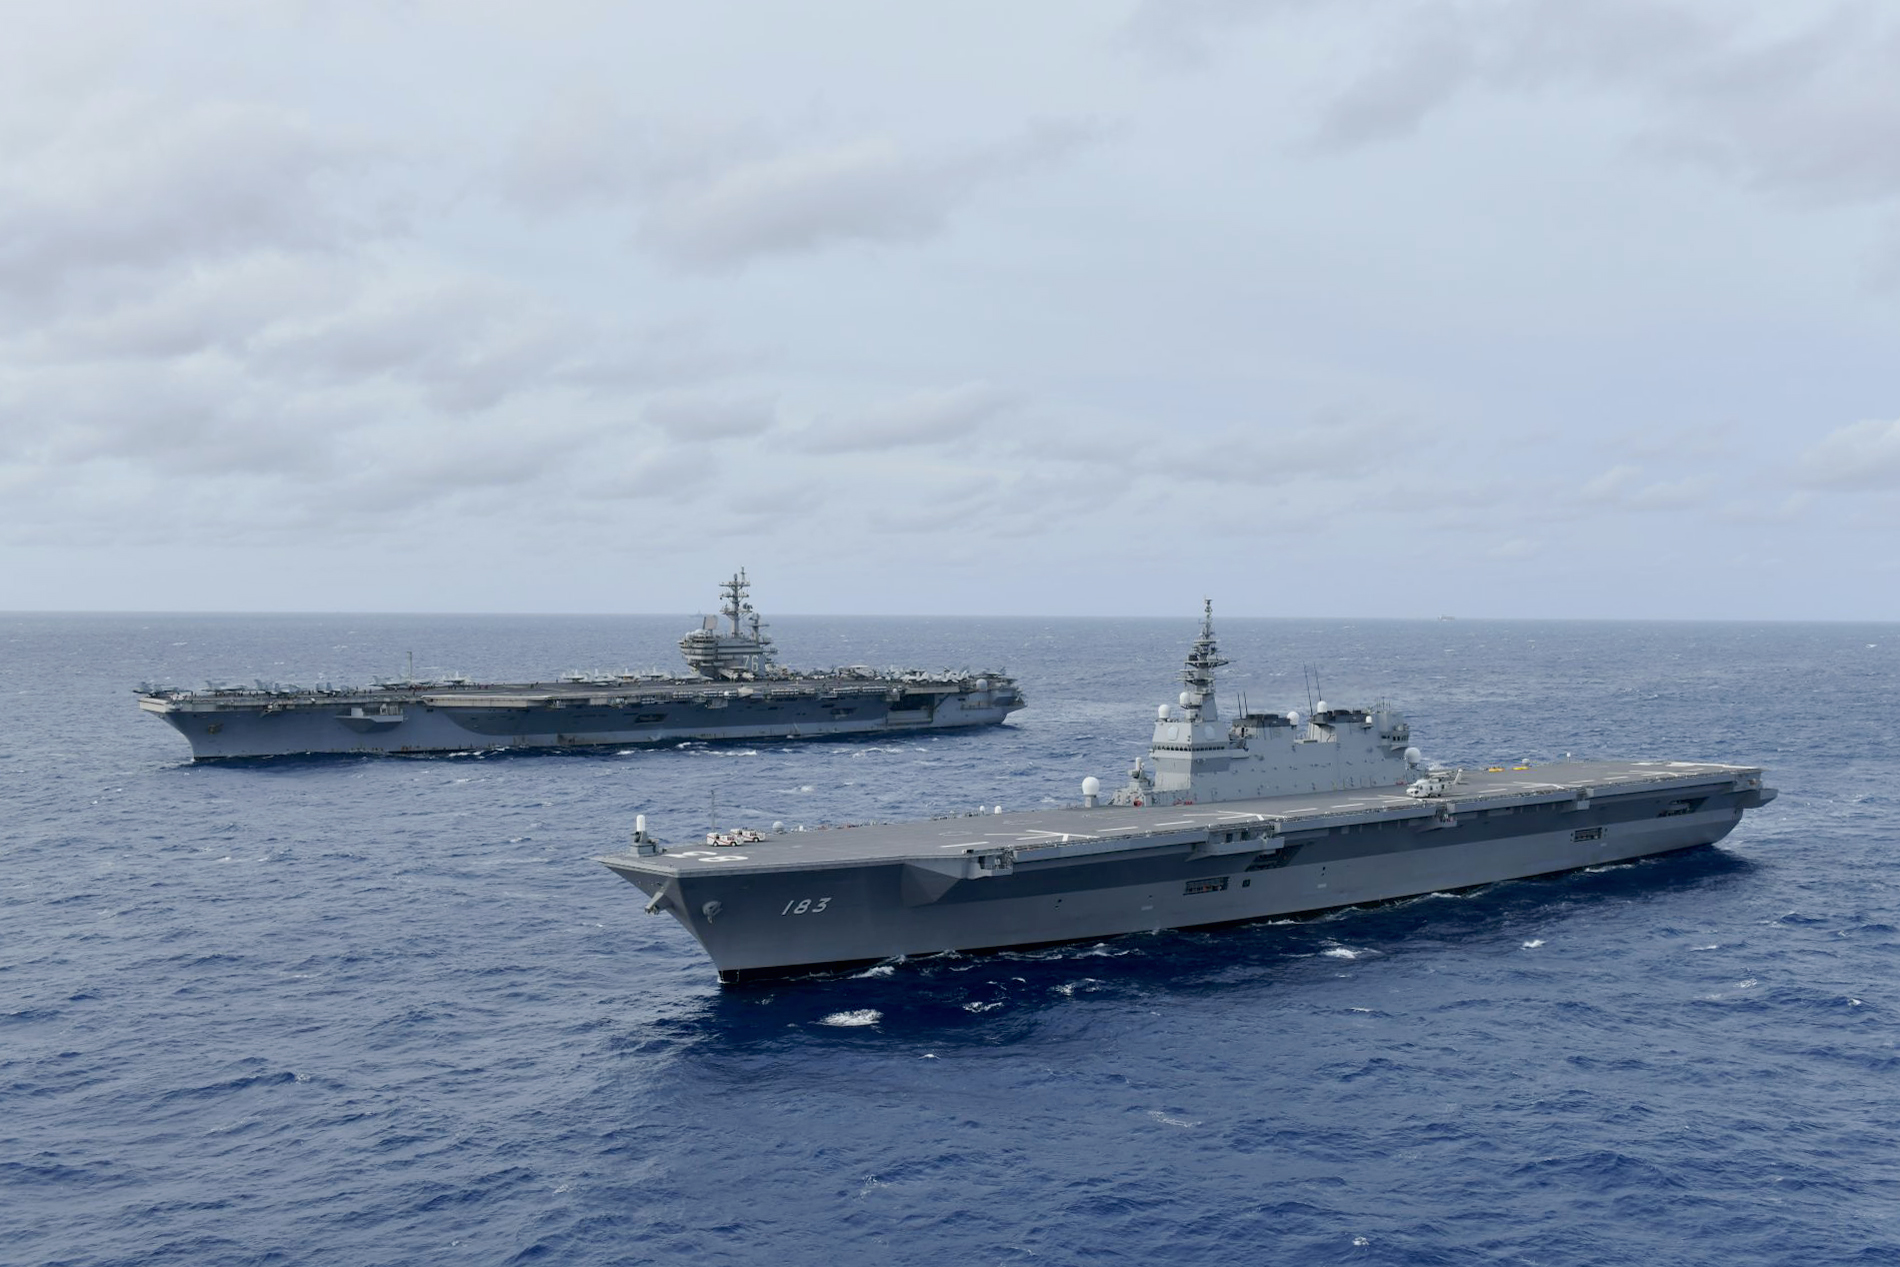 USS Ronald Reagan and JS Izumo sail together in the South China Sea